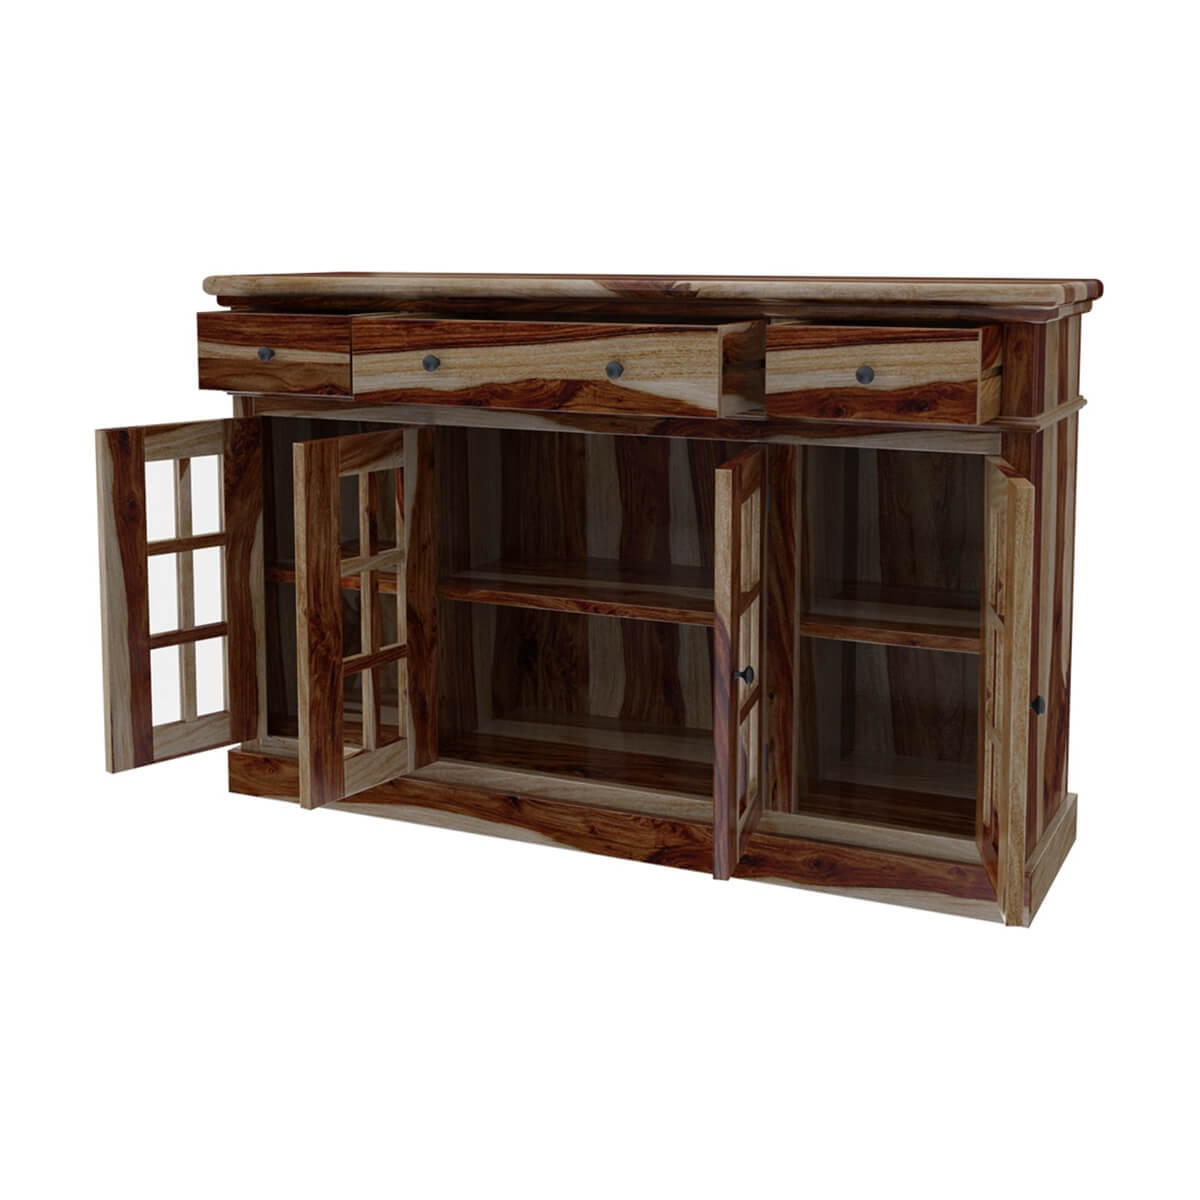 Dallas Ranch Solid Wood Square Dining Room Table Set.